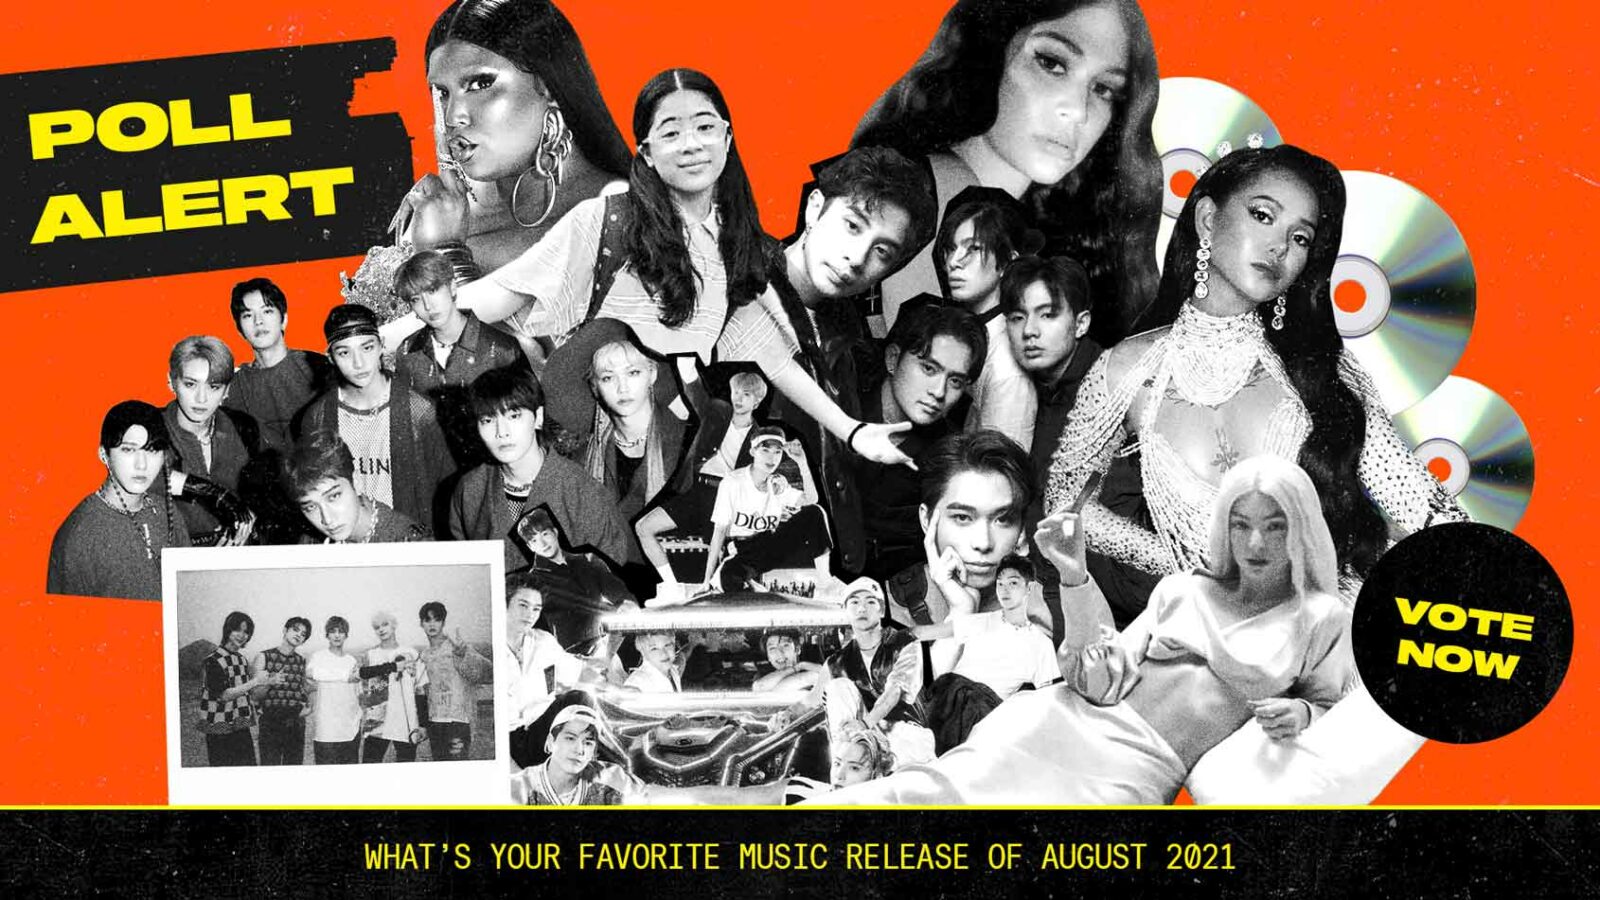 POLL: WHAT’S YOUR FAVORITE MUSIC RELEASE OF AUGUST 2021